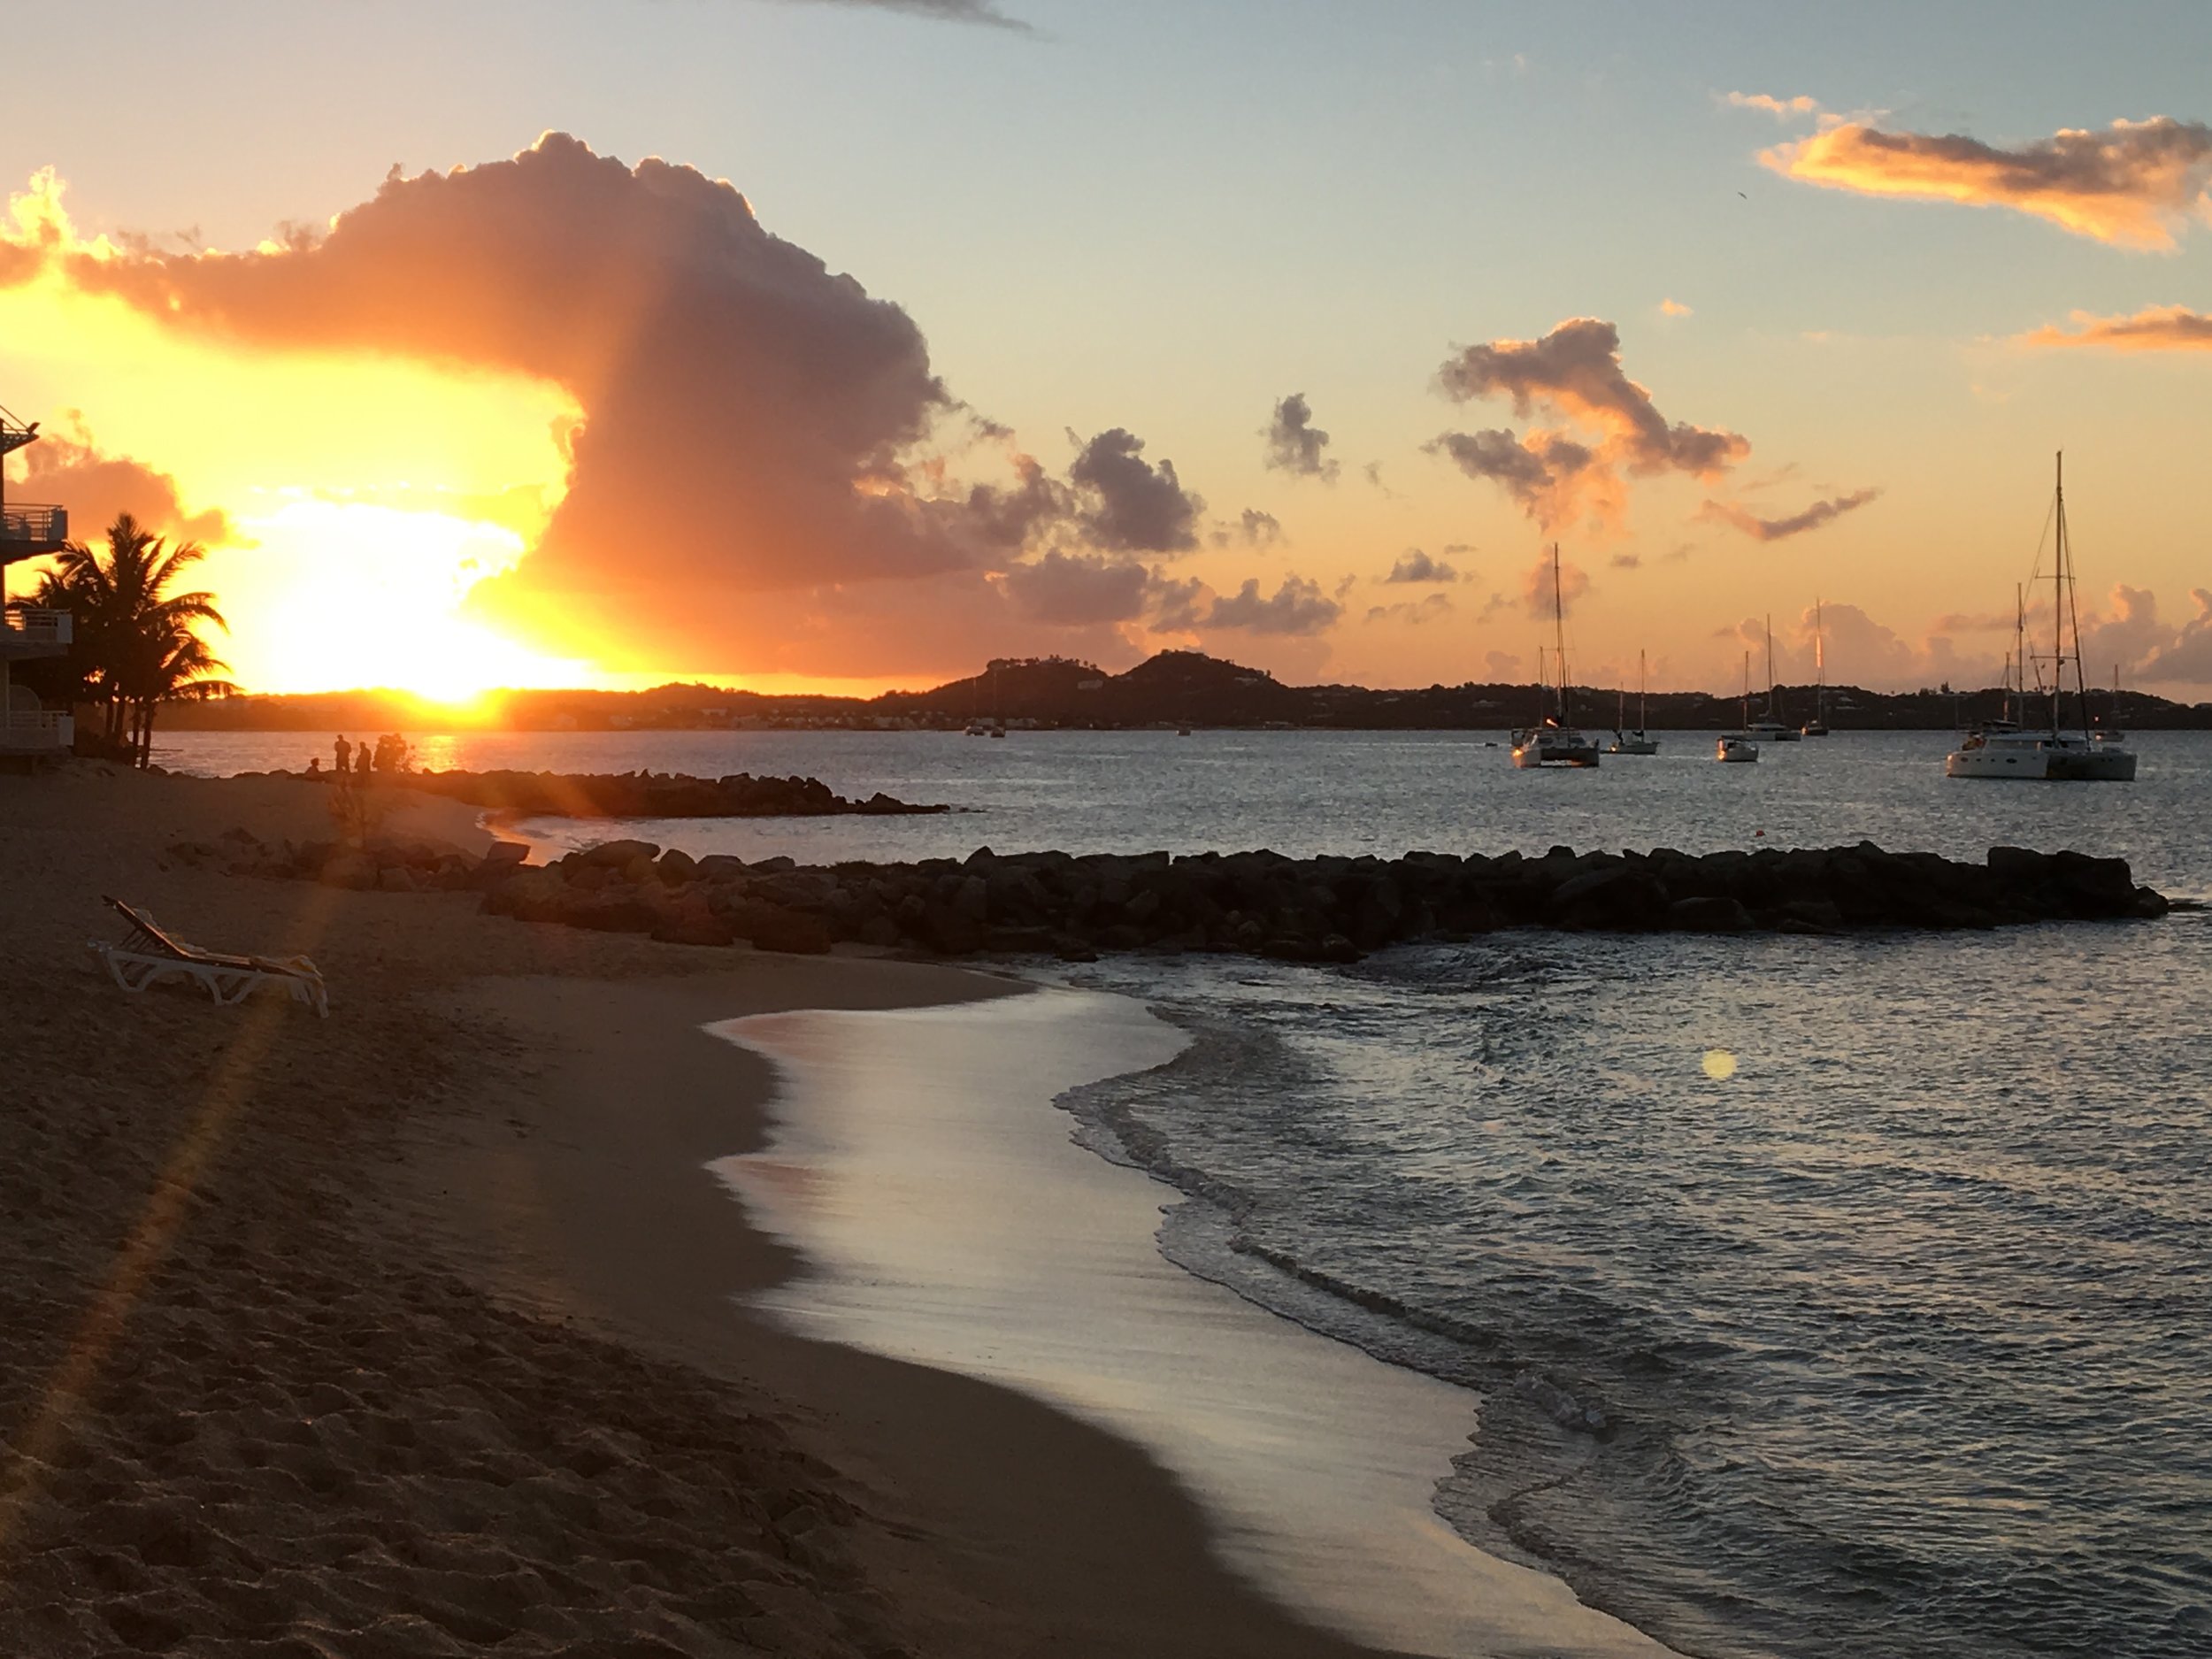 Sunset in St. Martin - 55 by 55 Travel